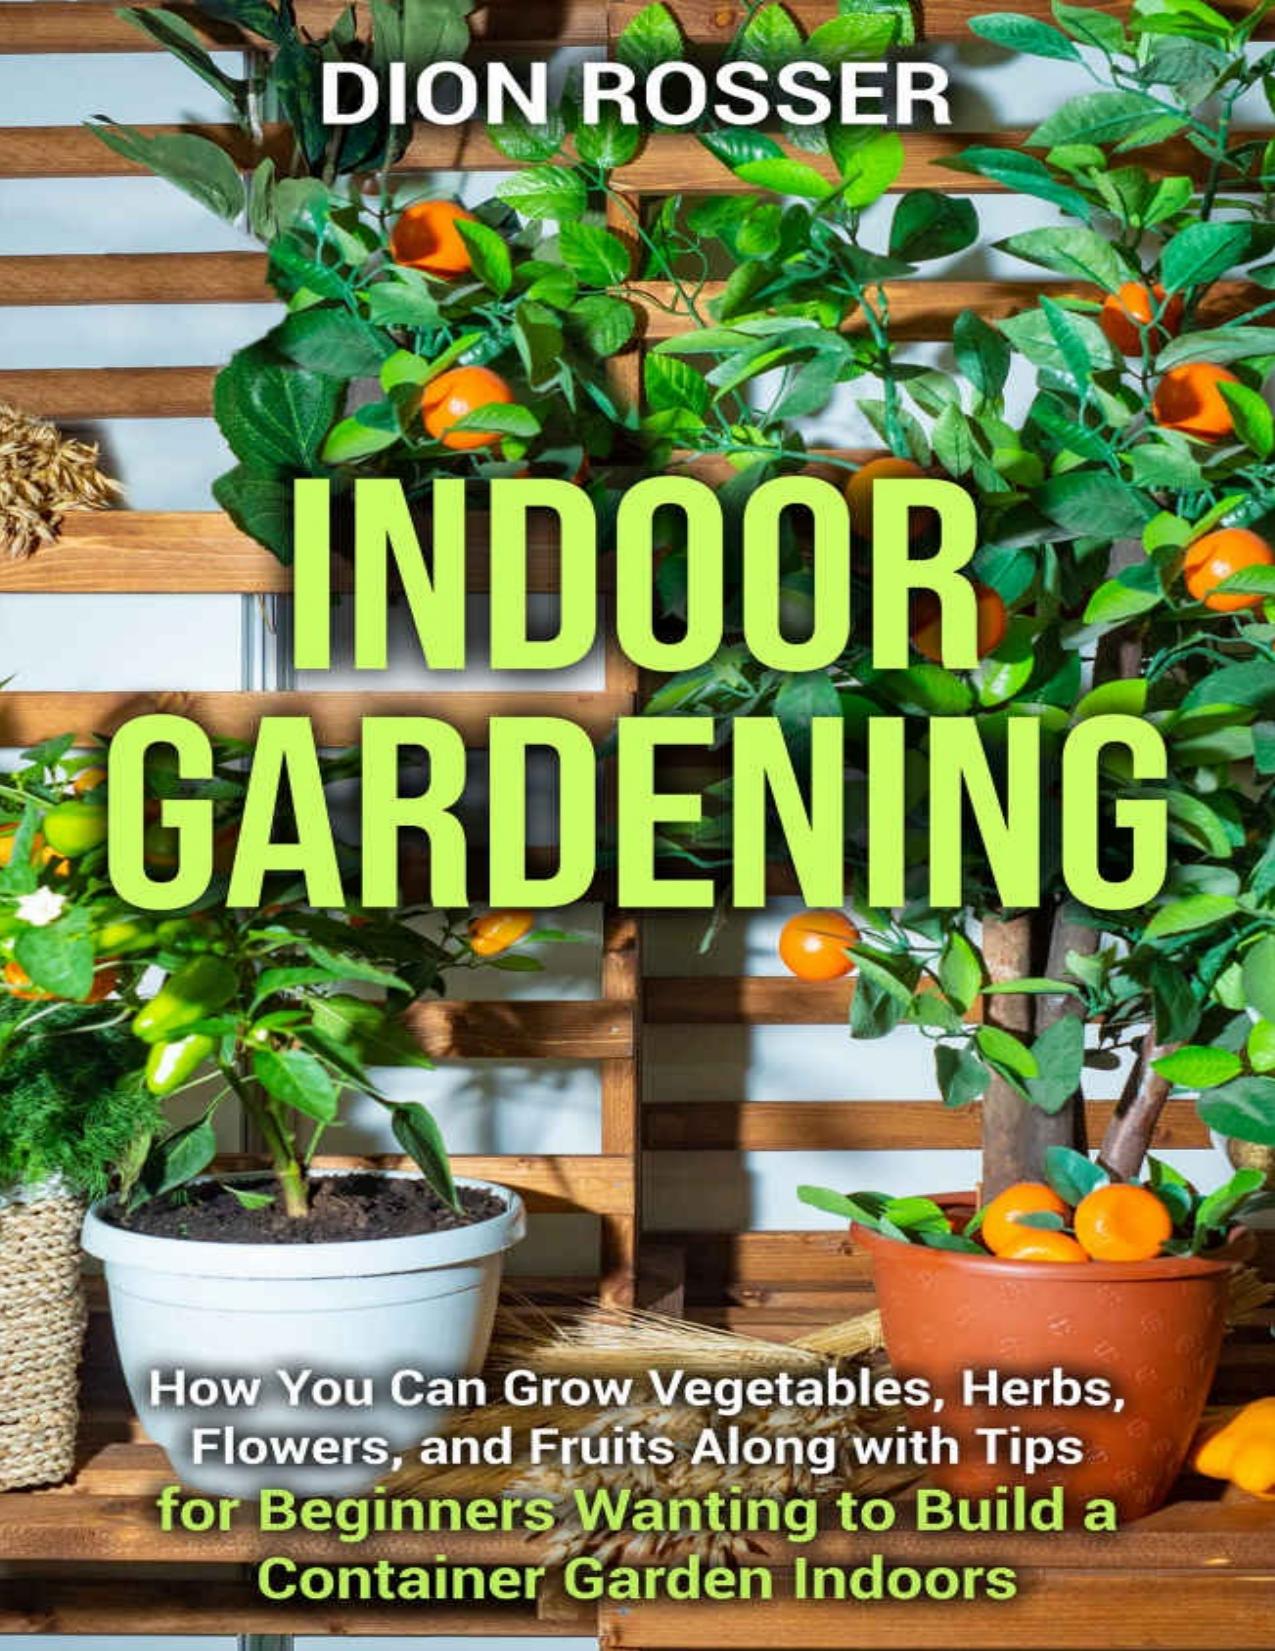 Indoor Gardening: How You Can Grow Vegetables, Herbs, Flowers, and Fruits Along with Tips for Beginners Wanting to Build a Container Garden Indoors by Rosser Dion